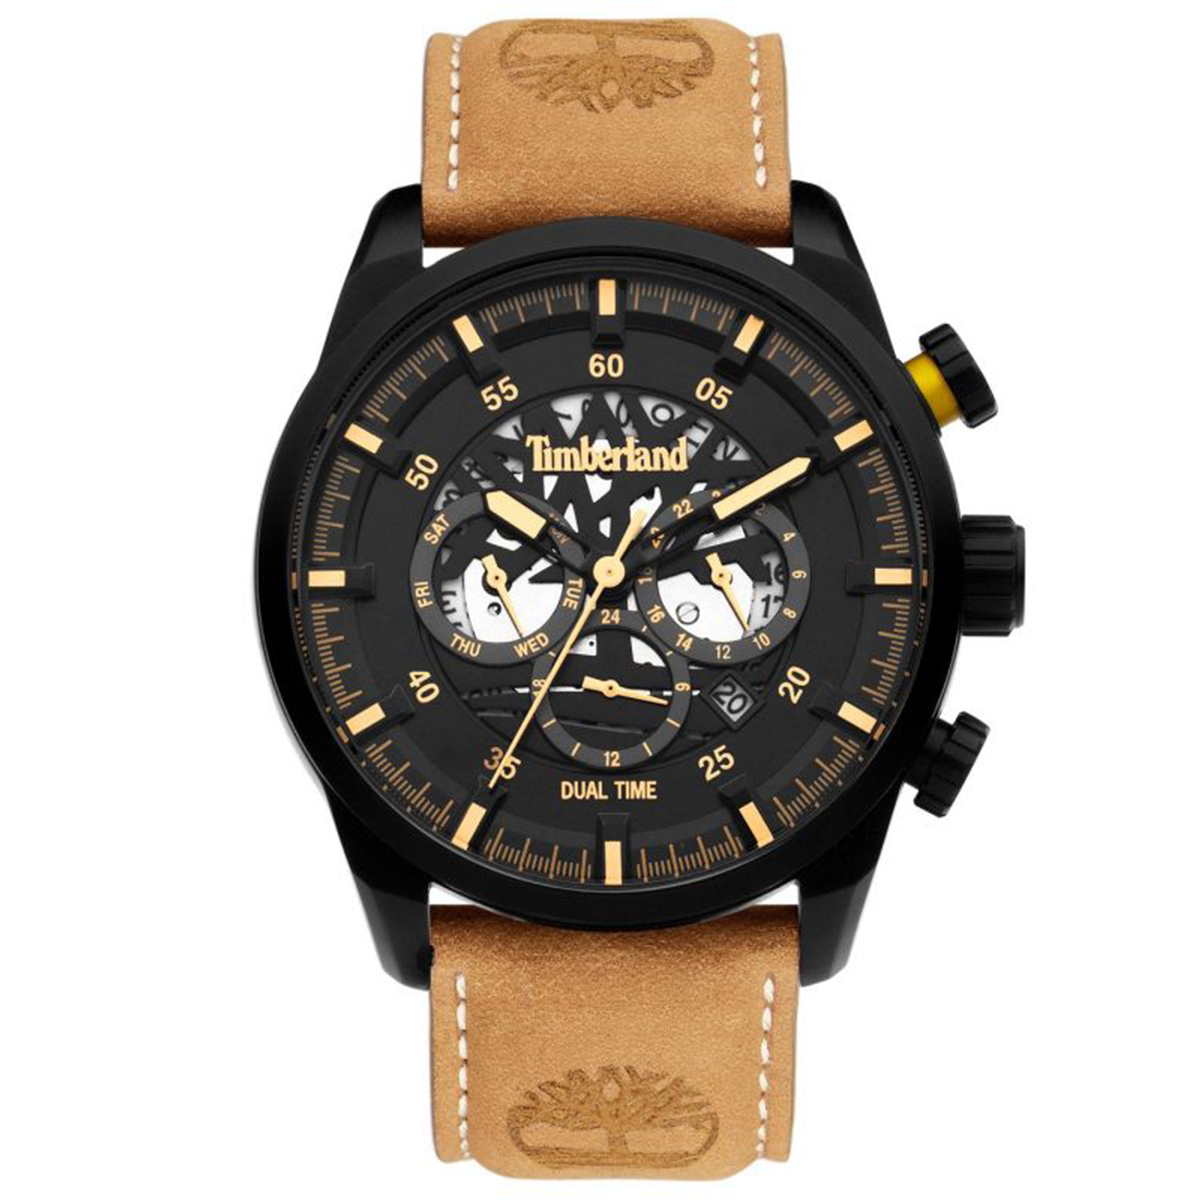 MONTRE TIMBERLAND HOMME M.FONCTION CUIR